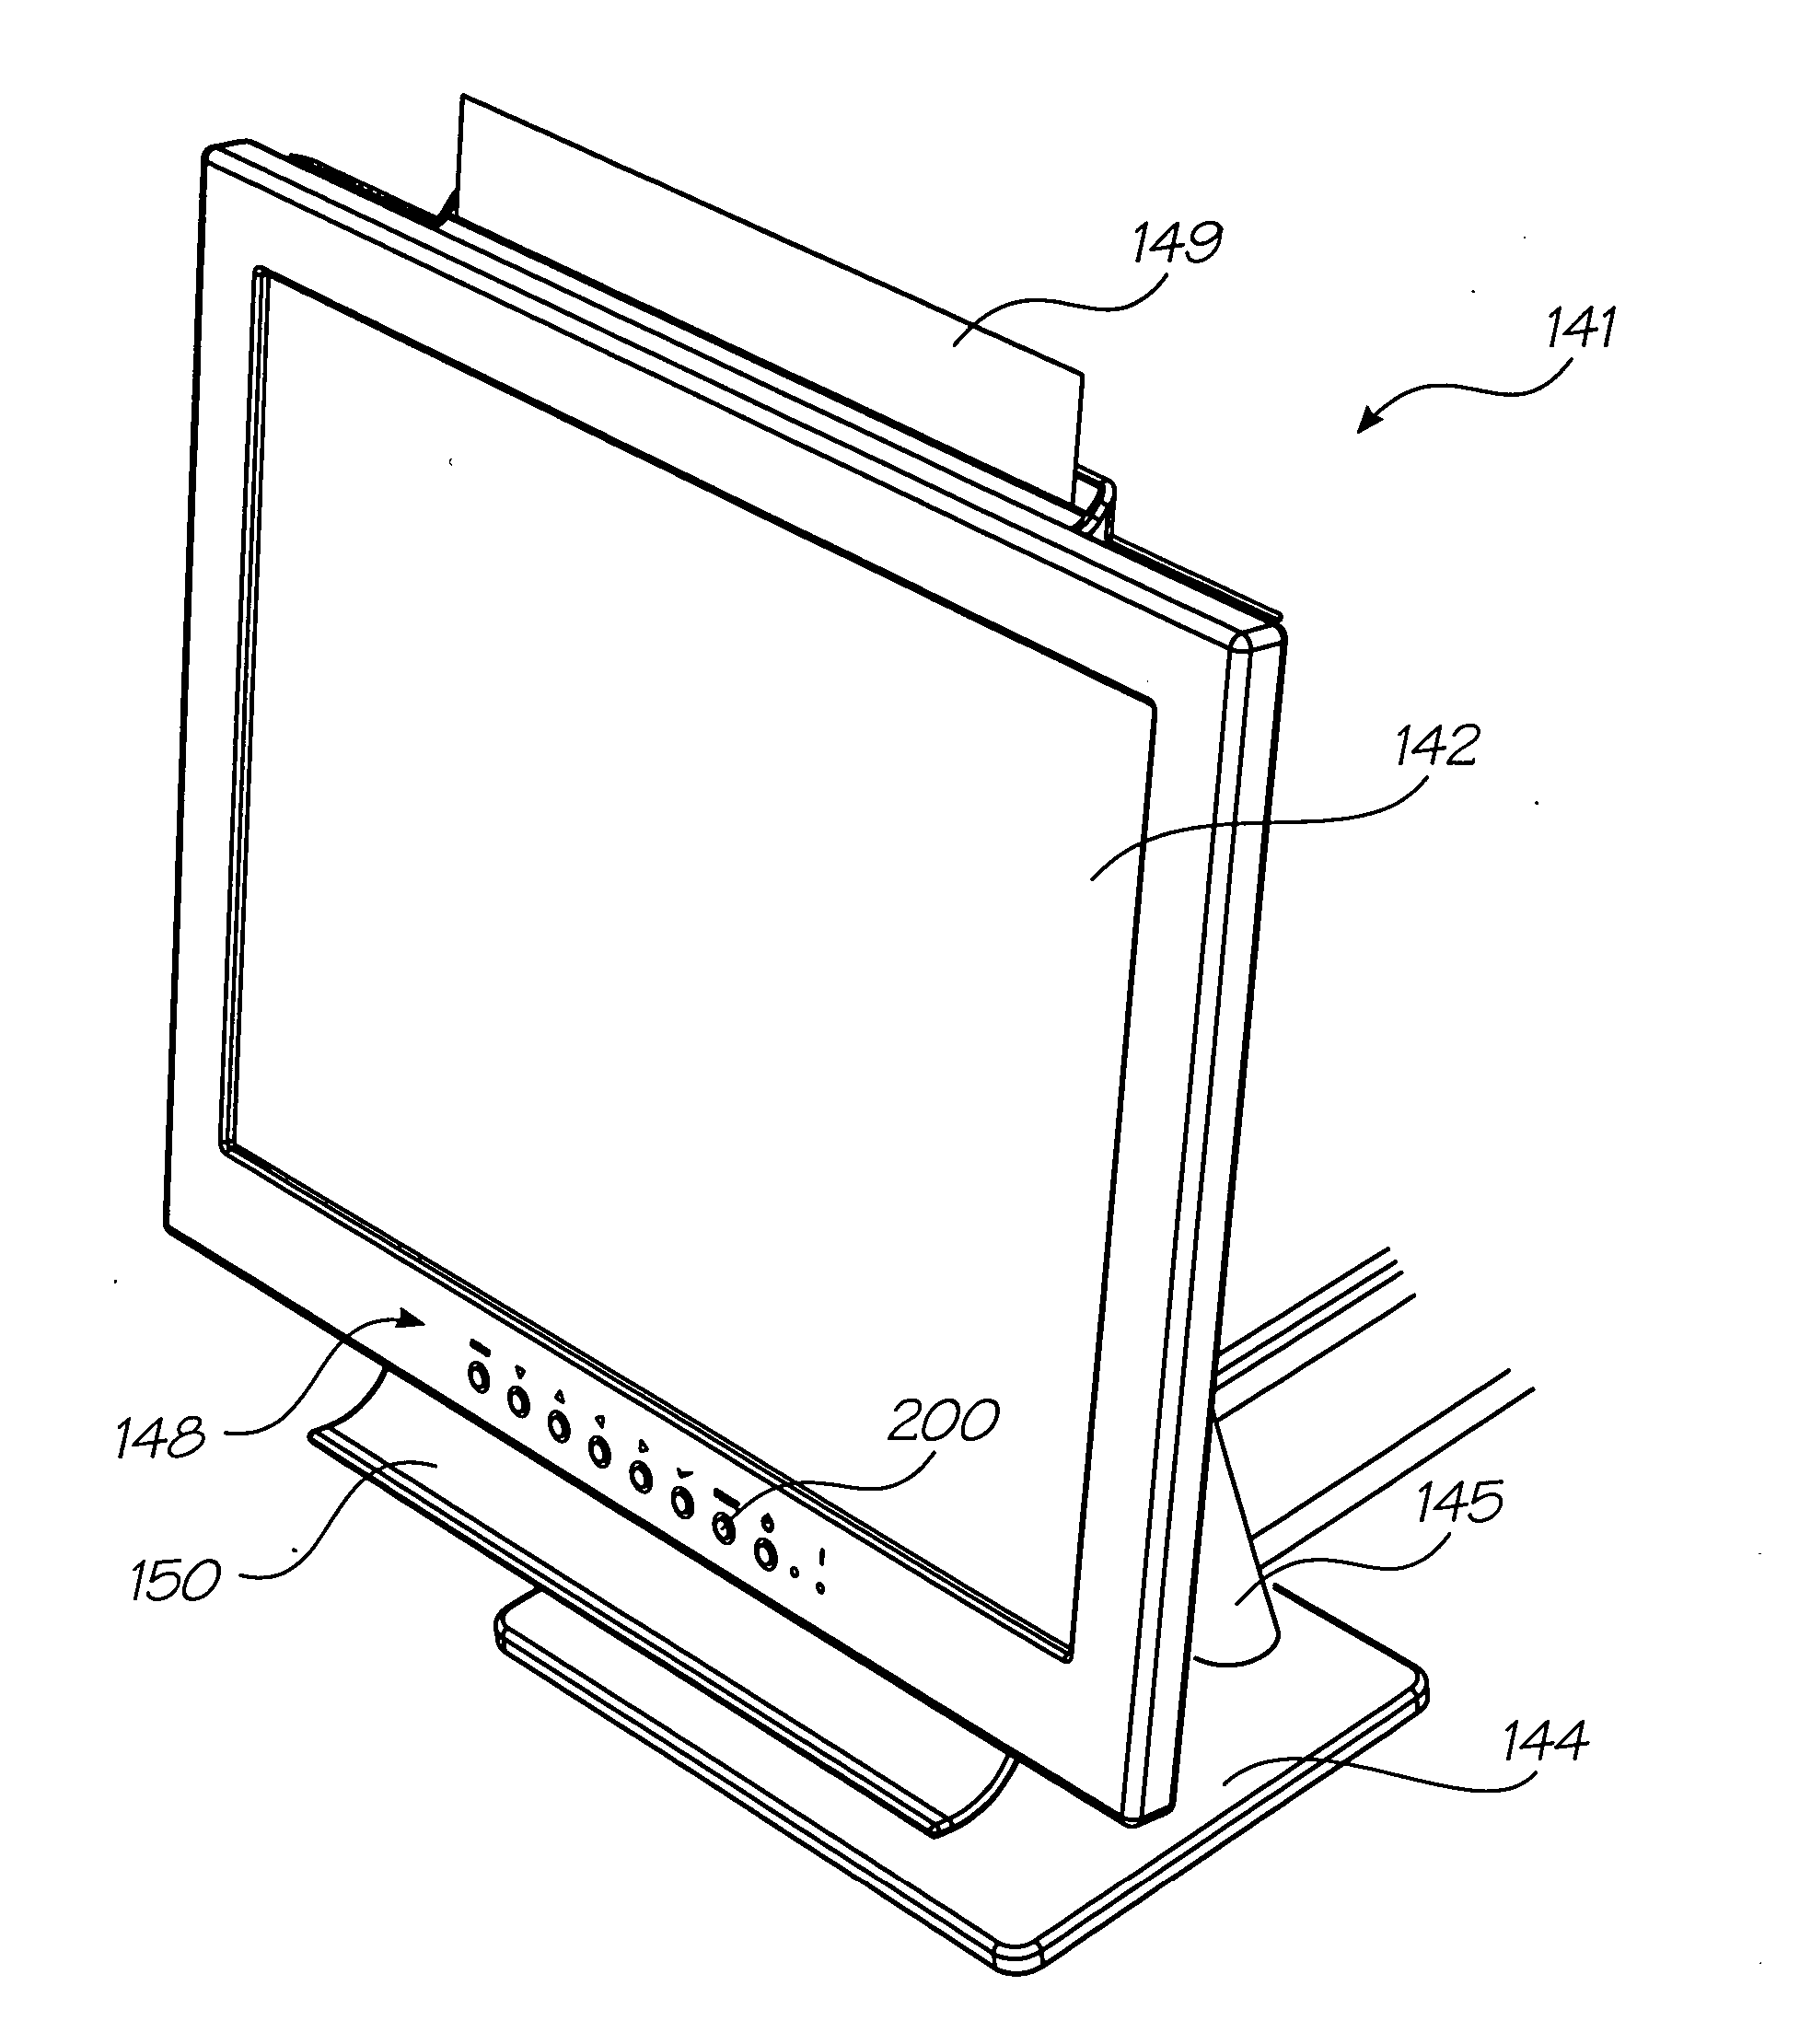 Display device configured such that an edge of print media is visible above an upper edge of the device